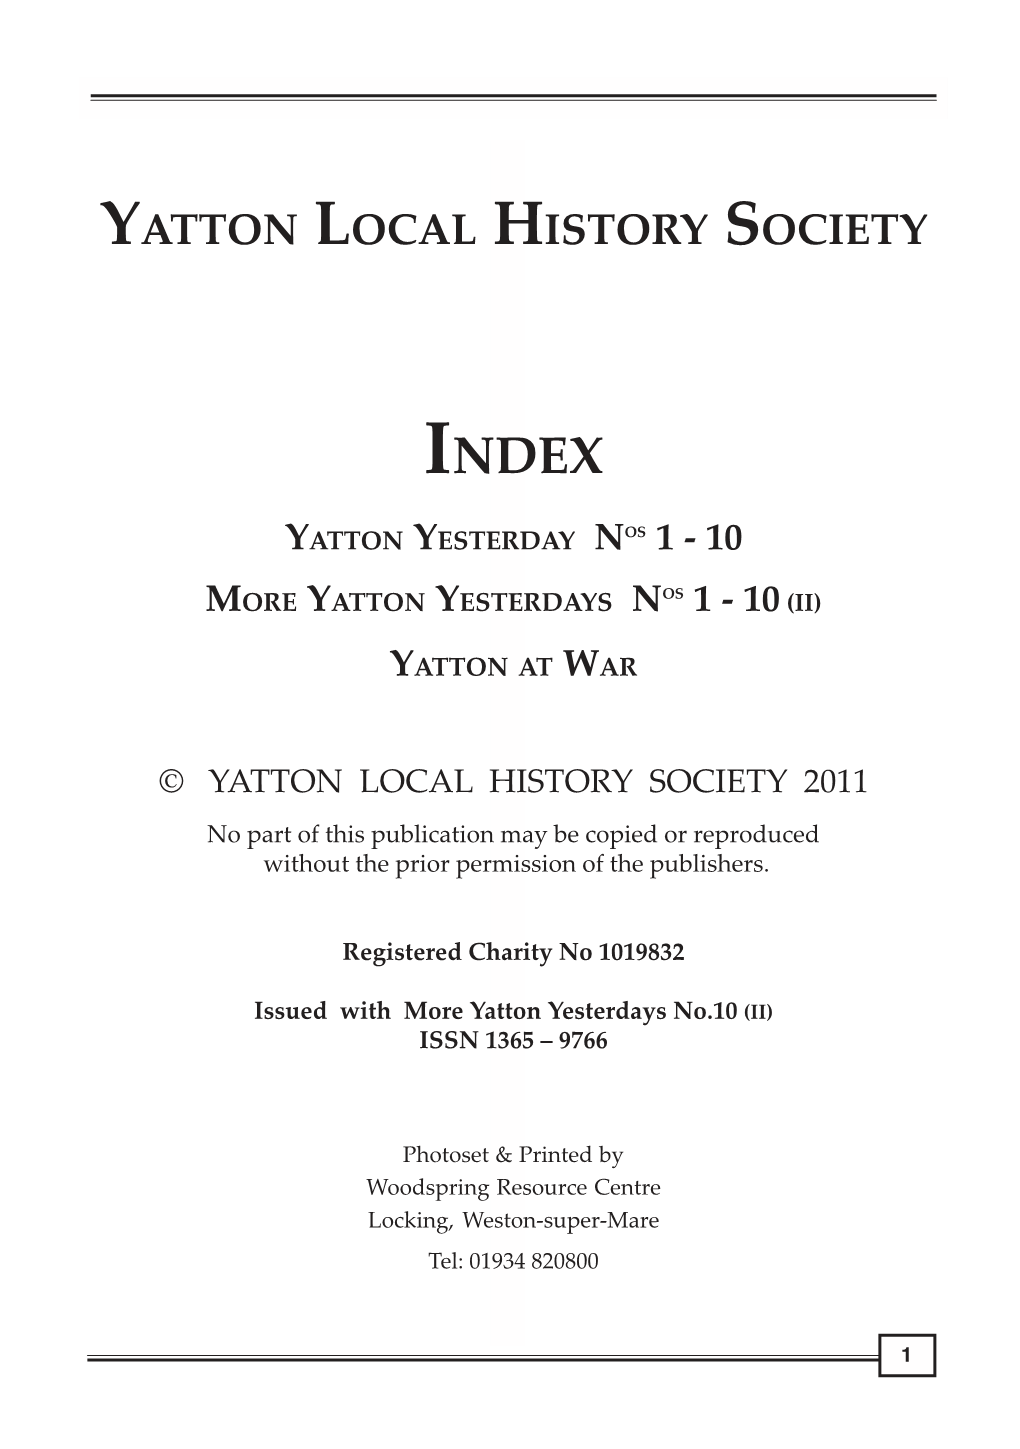 Index for YLHS Publications 2012